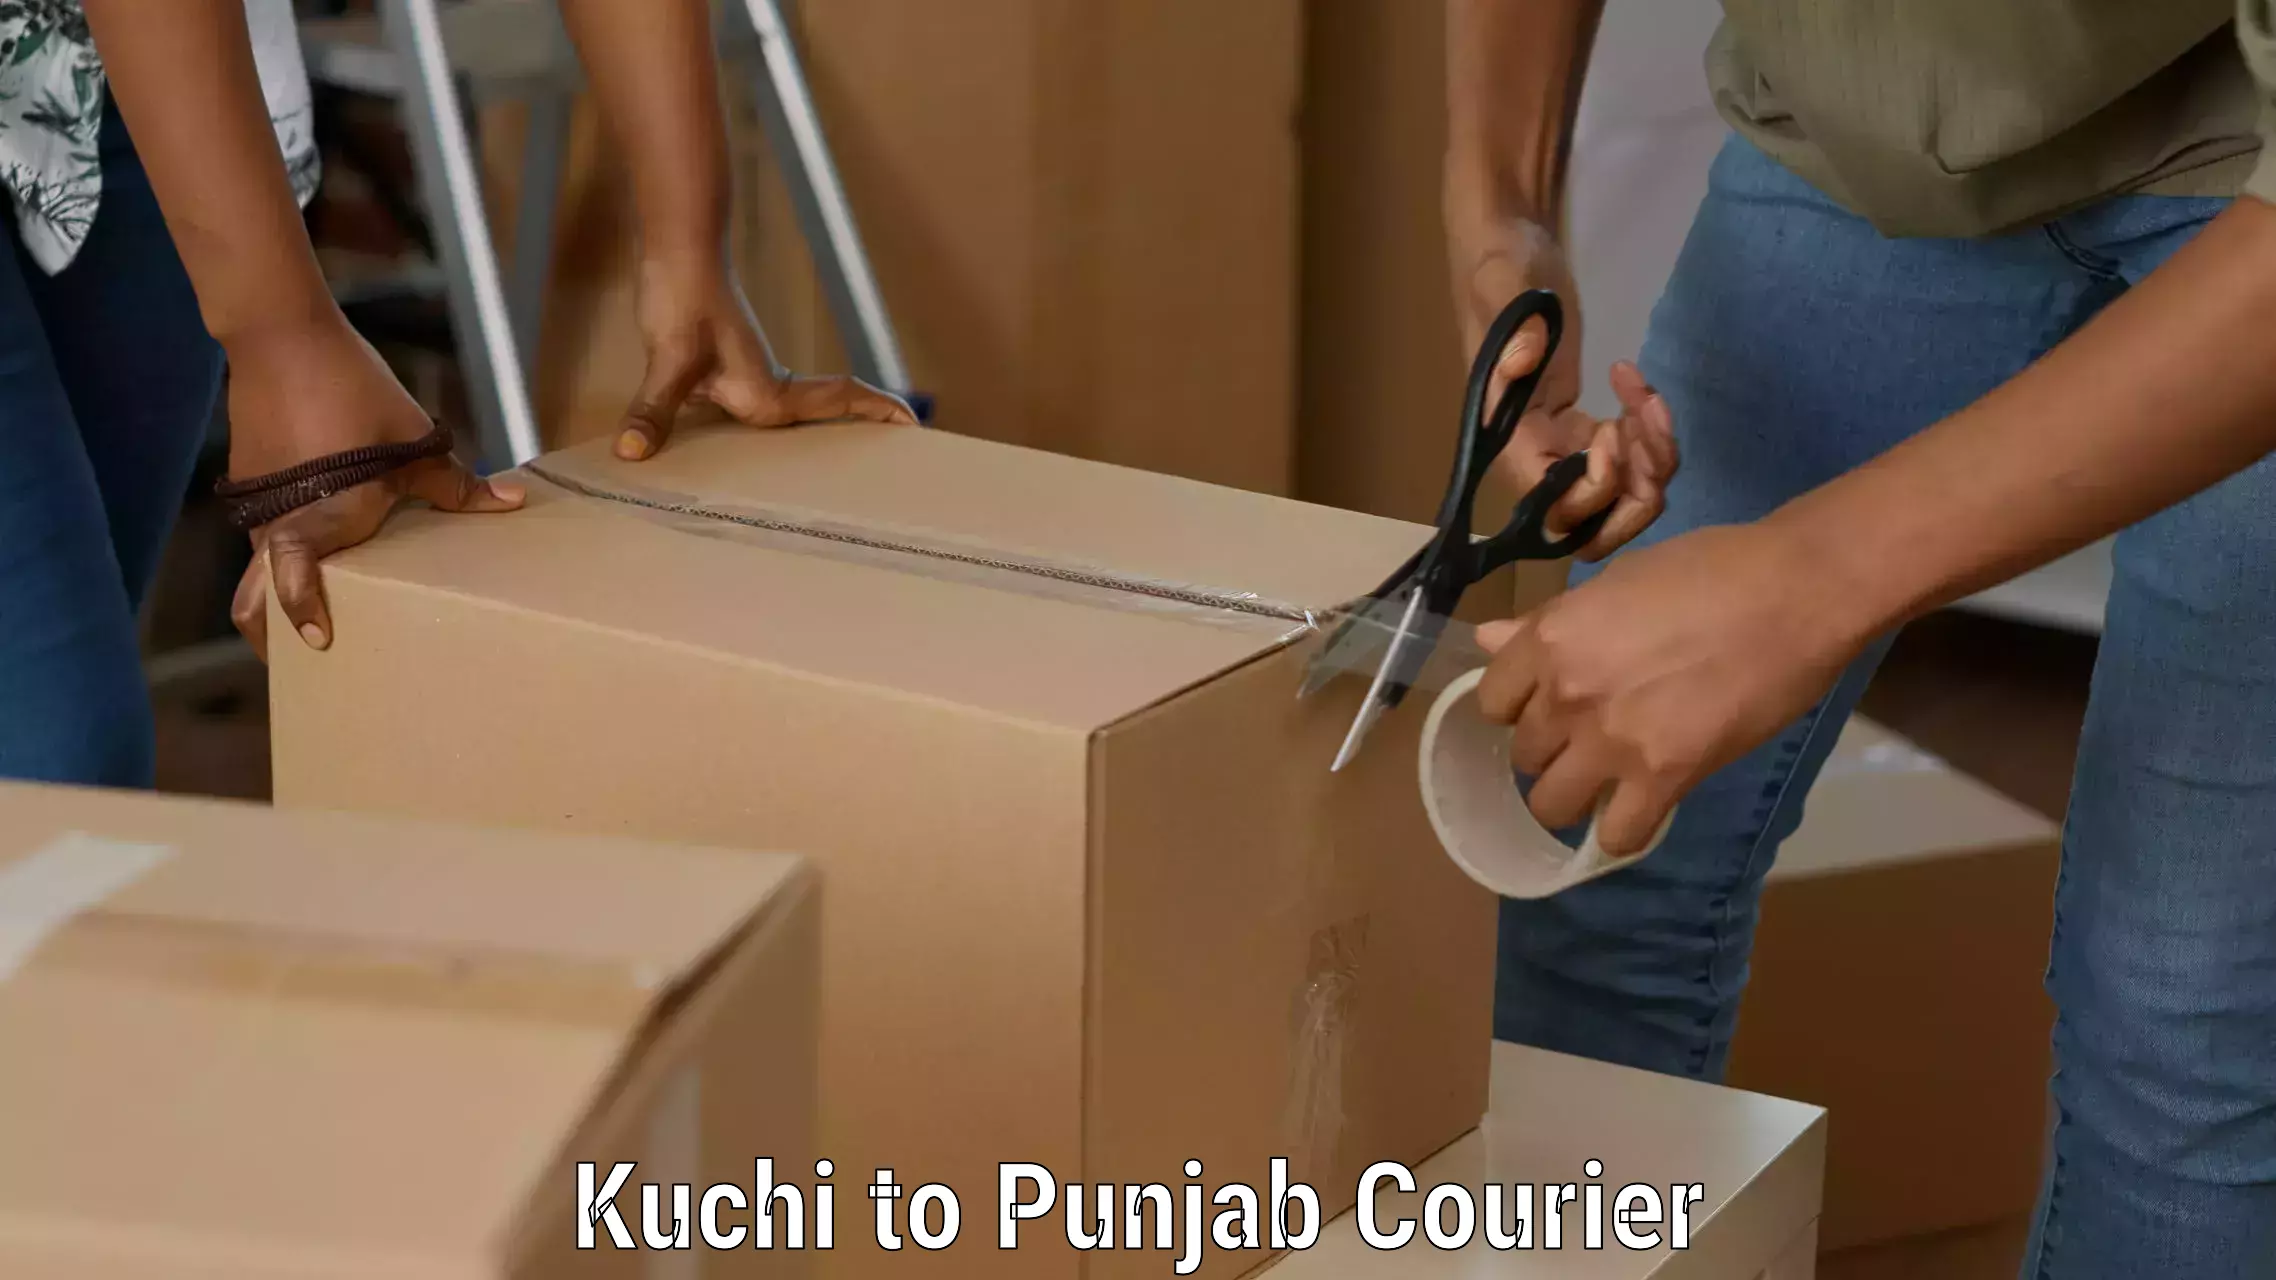 Overnight delivery services Kuchi to Mohali